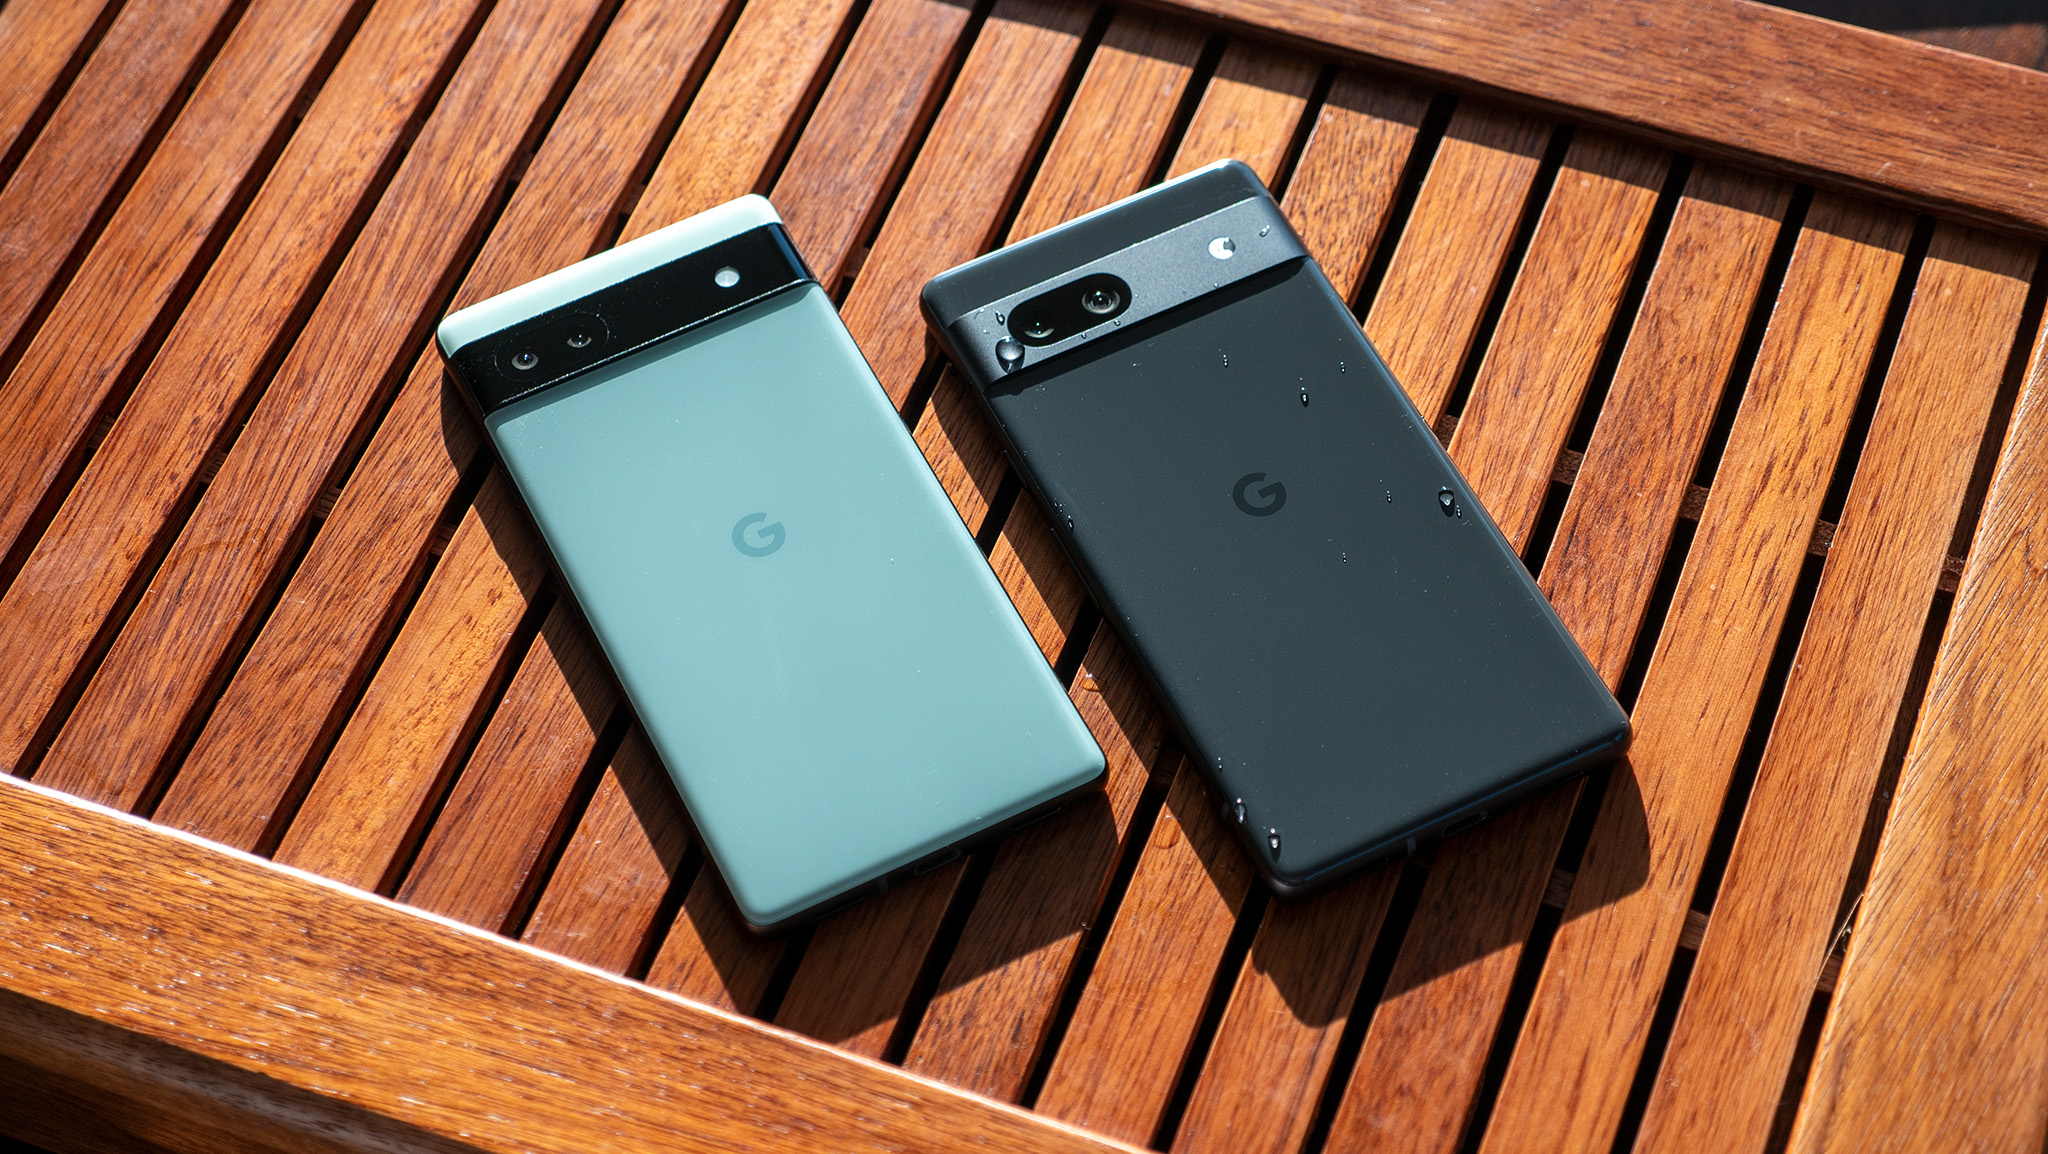 Comparing the Google Pixel 6a hardware with the Google Pixel 7a